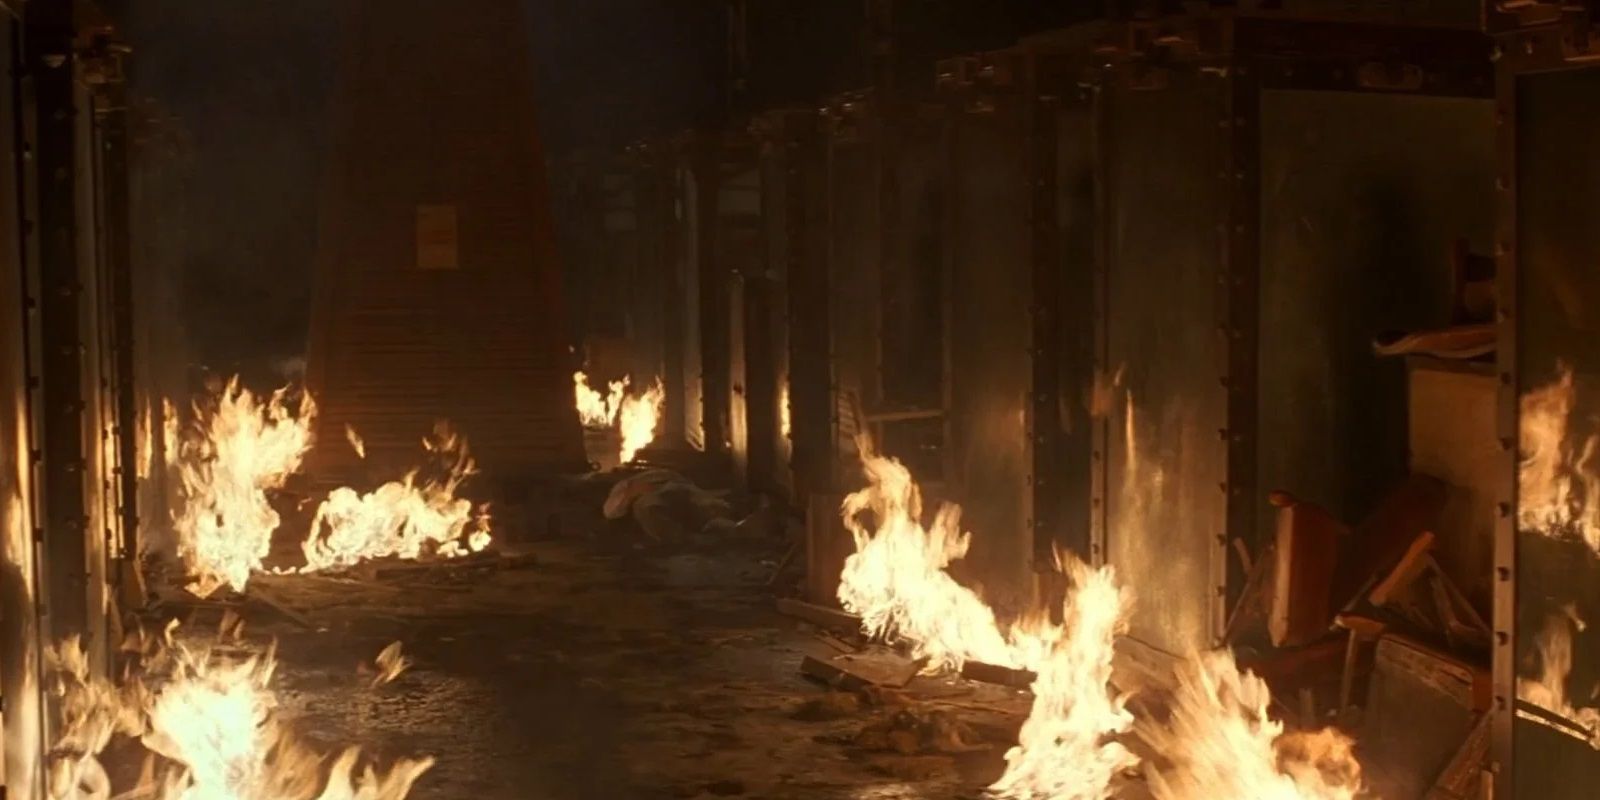 The theater burns at the end of The Prestige